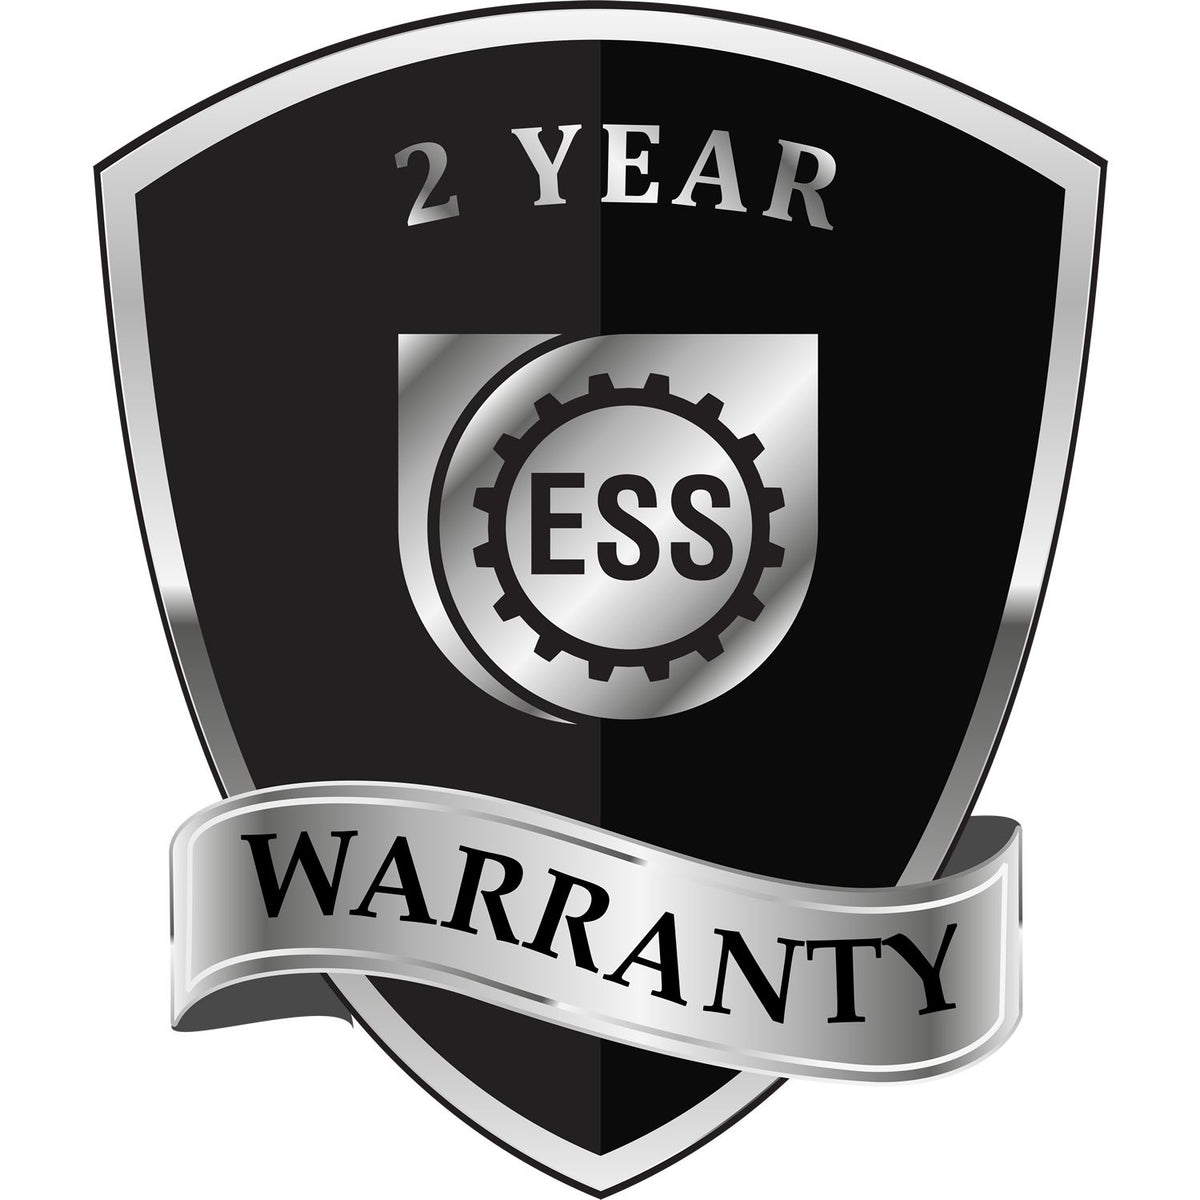 A badge or emblem showing a warranty icon for the State of Washington Extended Long Reach Engineer Seal